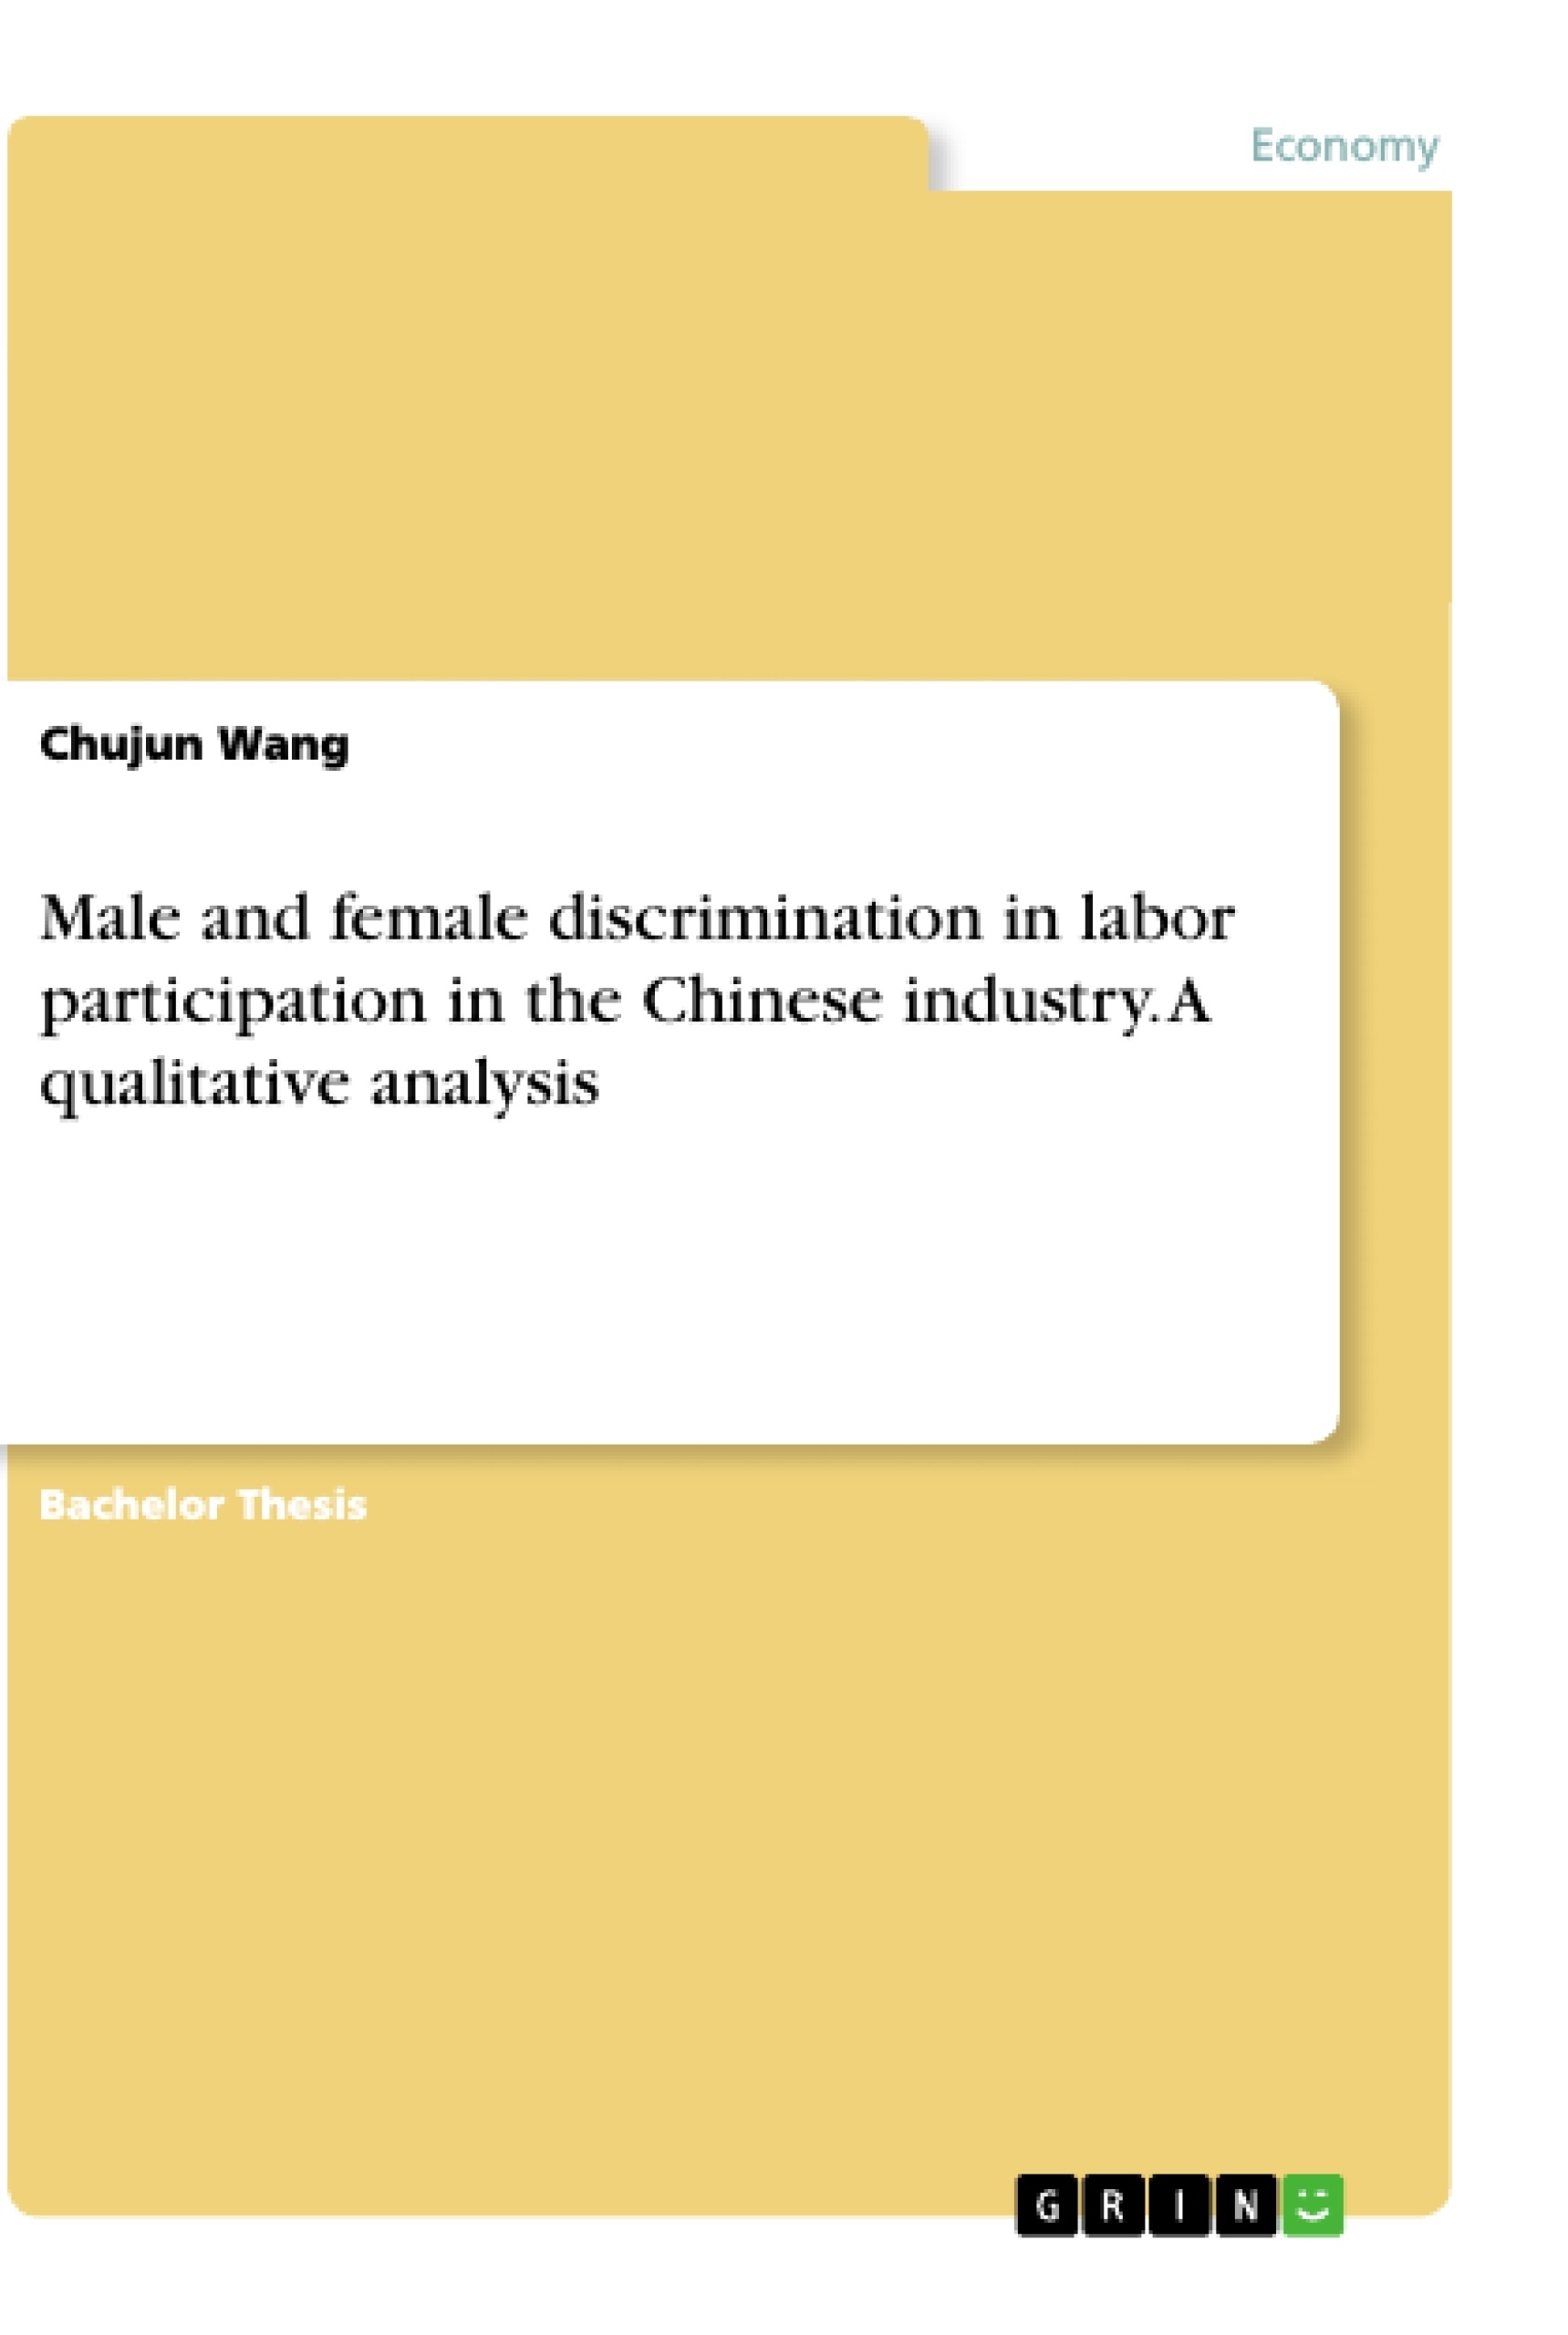 Title: Male and female discrimination in labor participation in the Chinese industry. A qualitative analysis